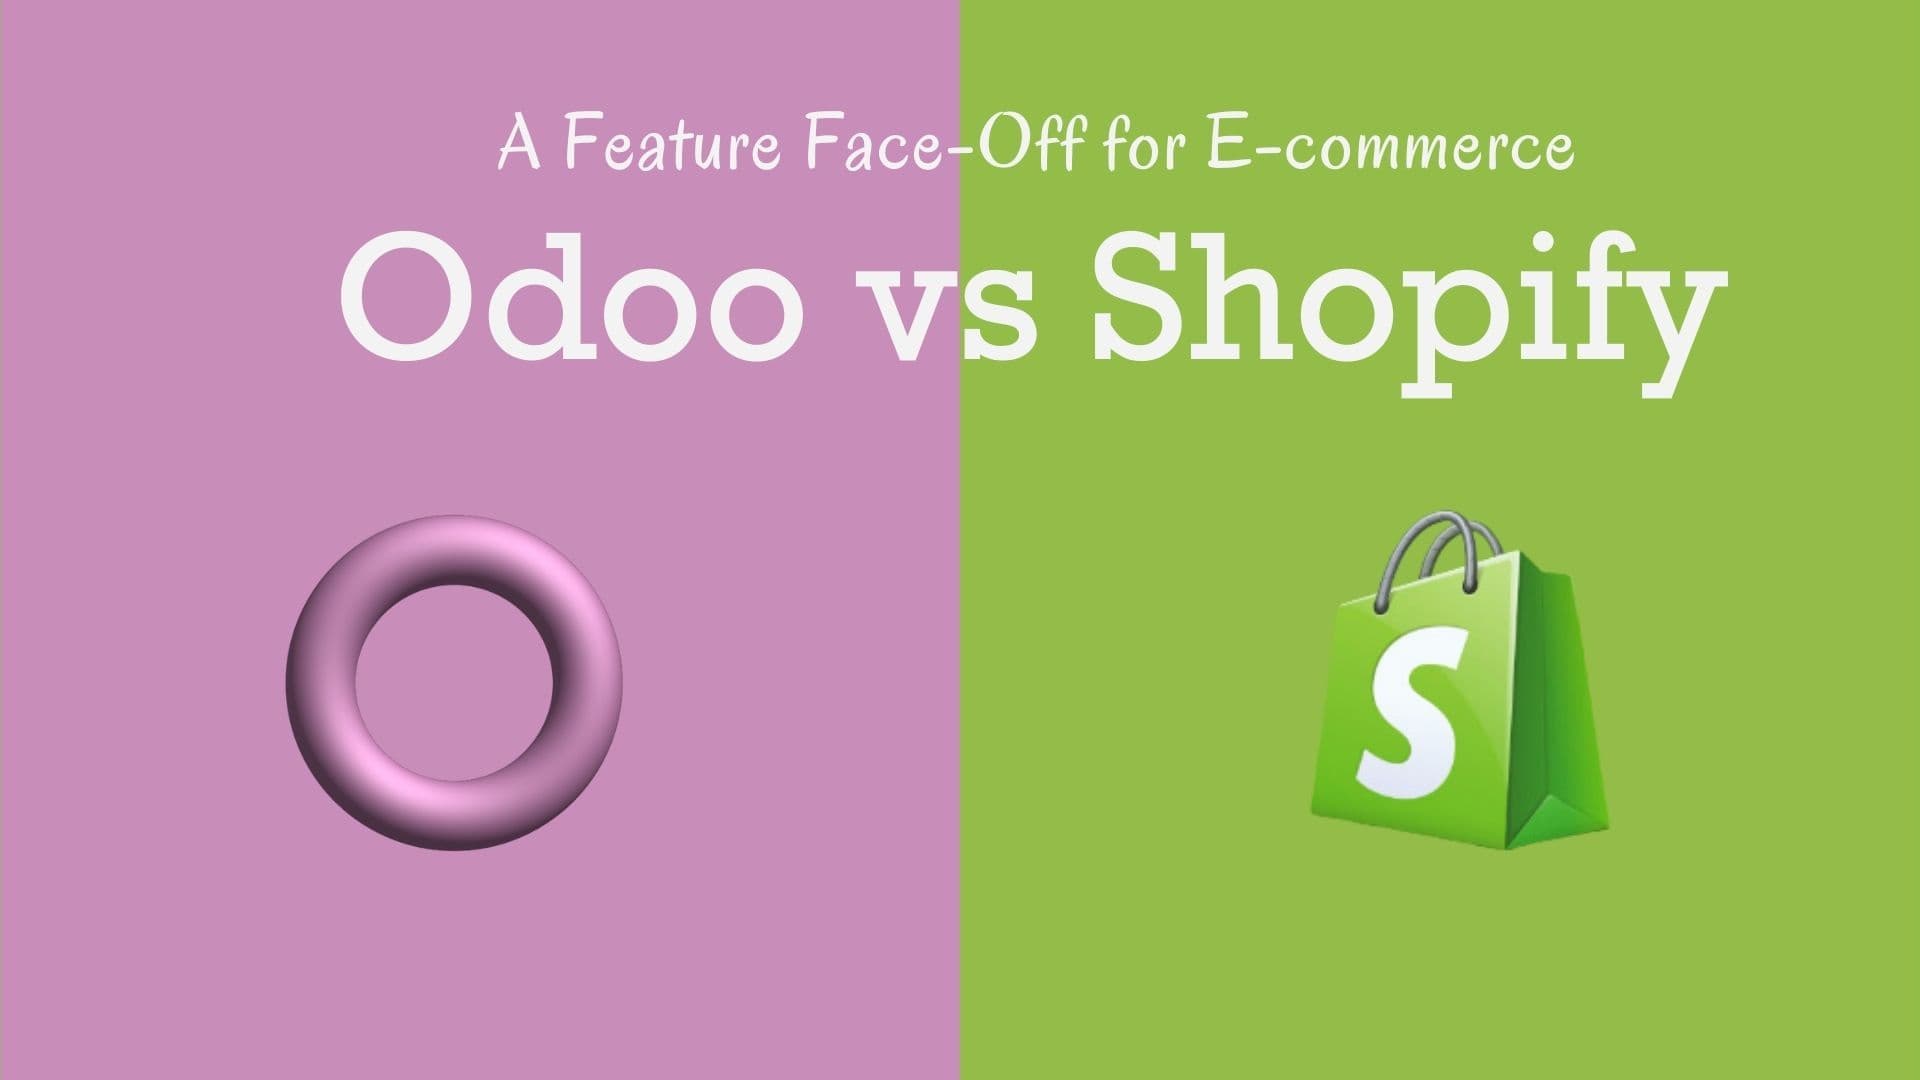 Odoo vs Shopify: A Feature Face-Off for E-commerce